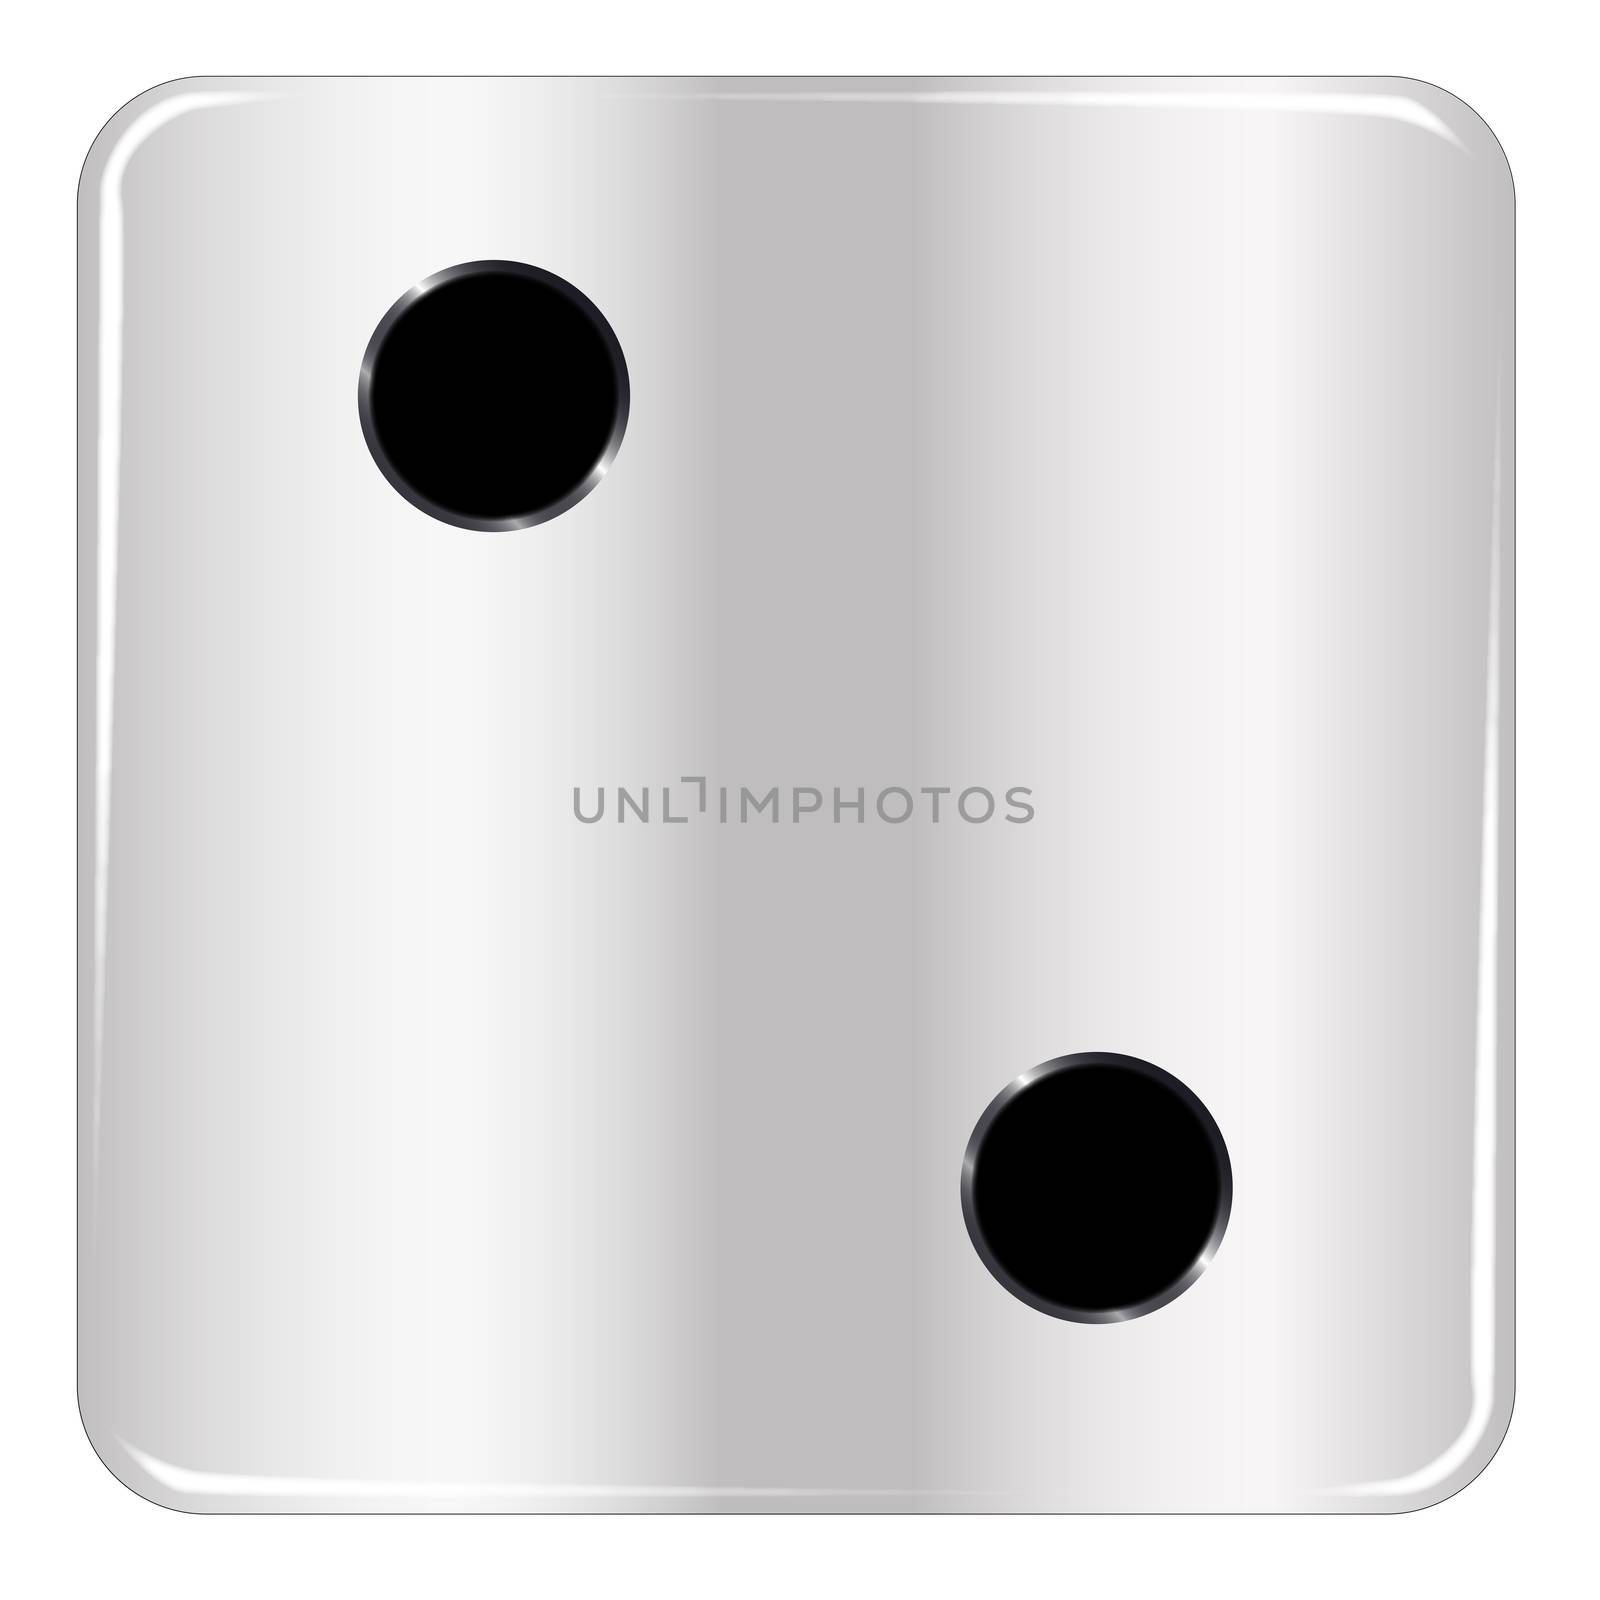 The face of a dice with two black spots over a white background